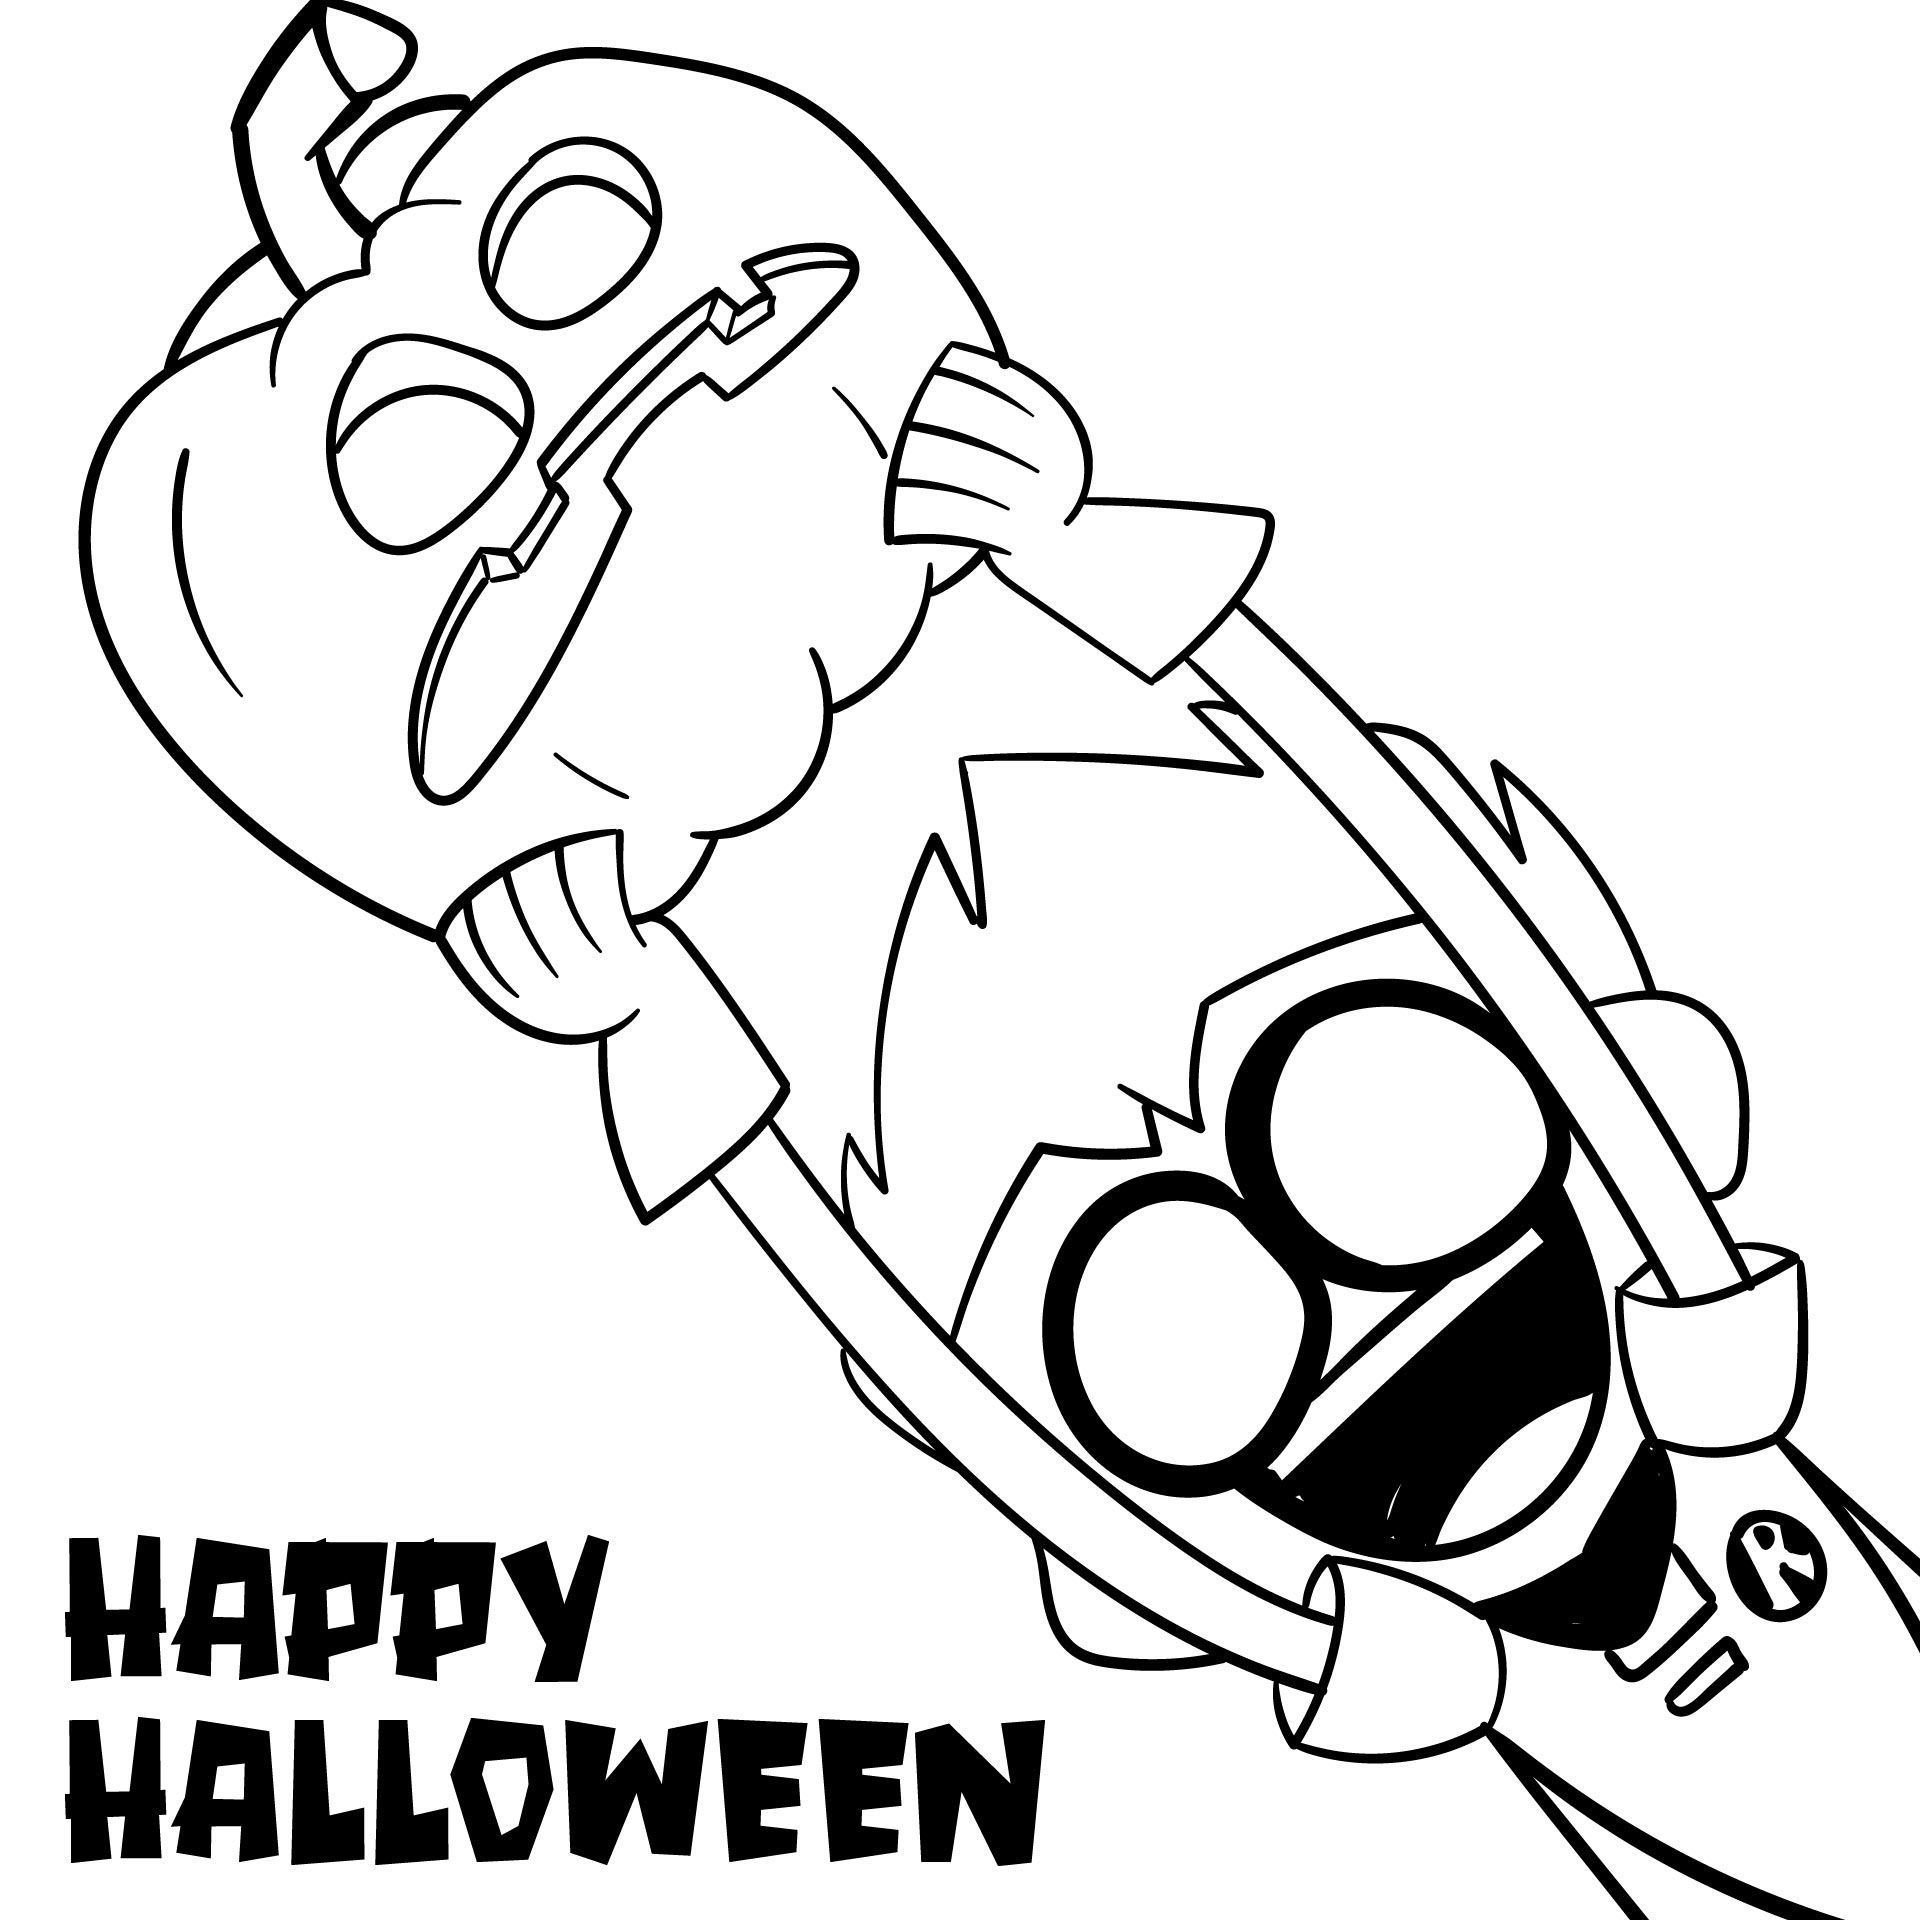 Cute Halloween Coloring Pages To Print